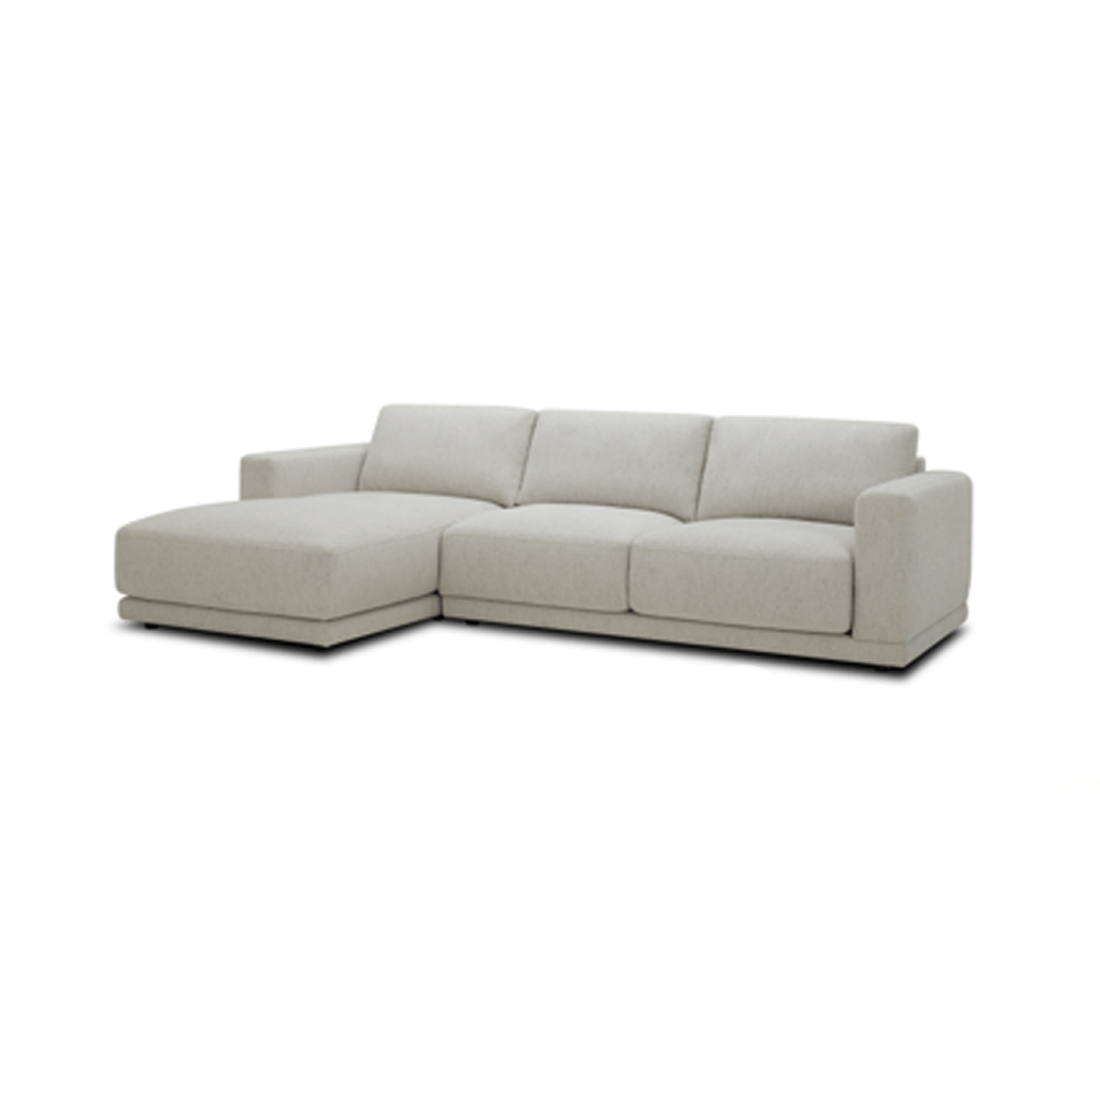 Harbour 3 Seater LHF Chaise Lounge